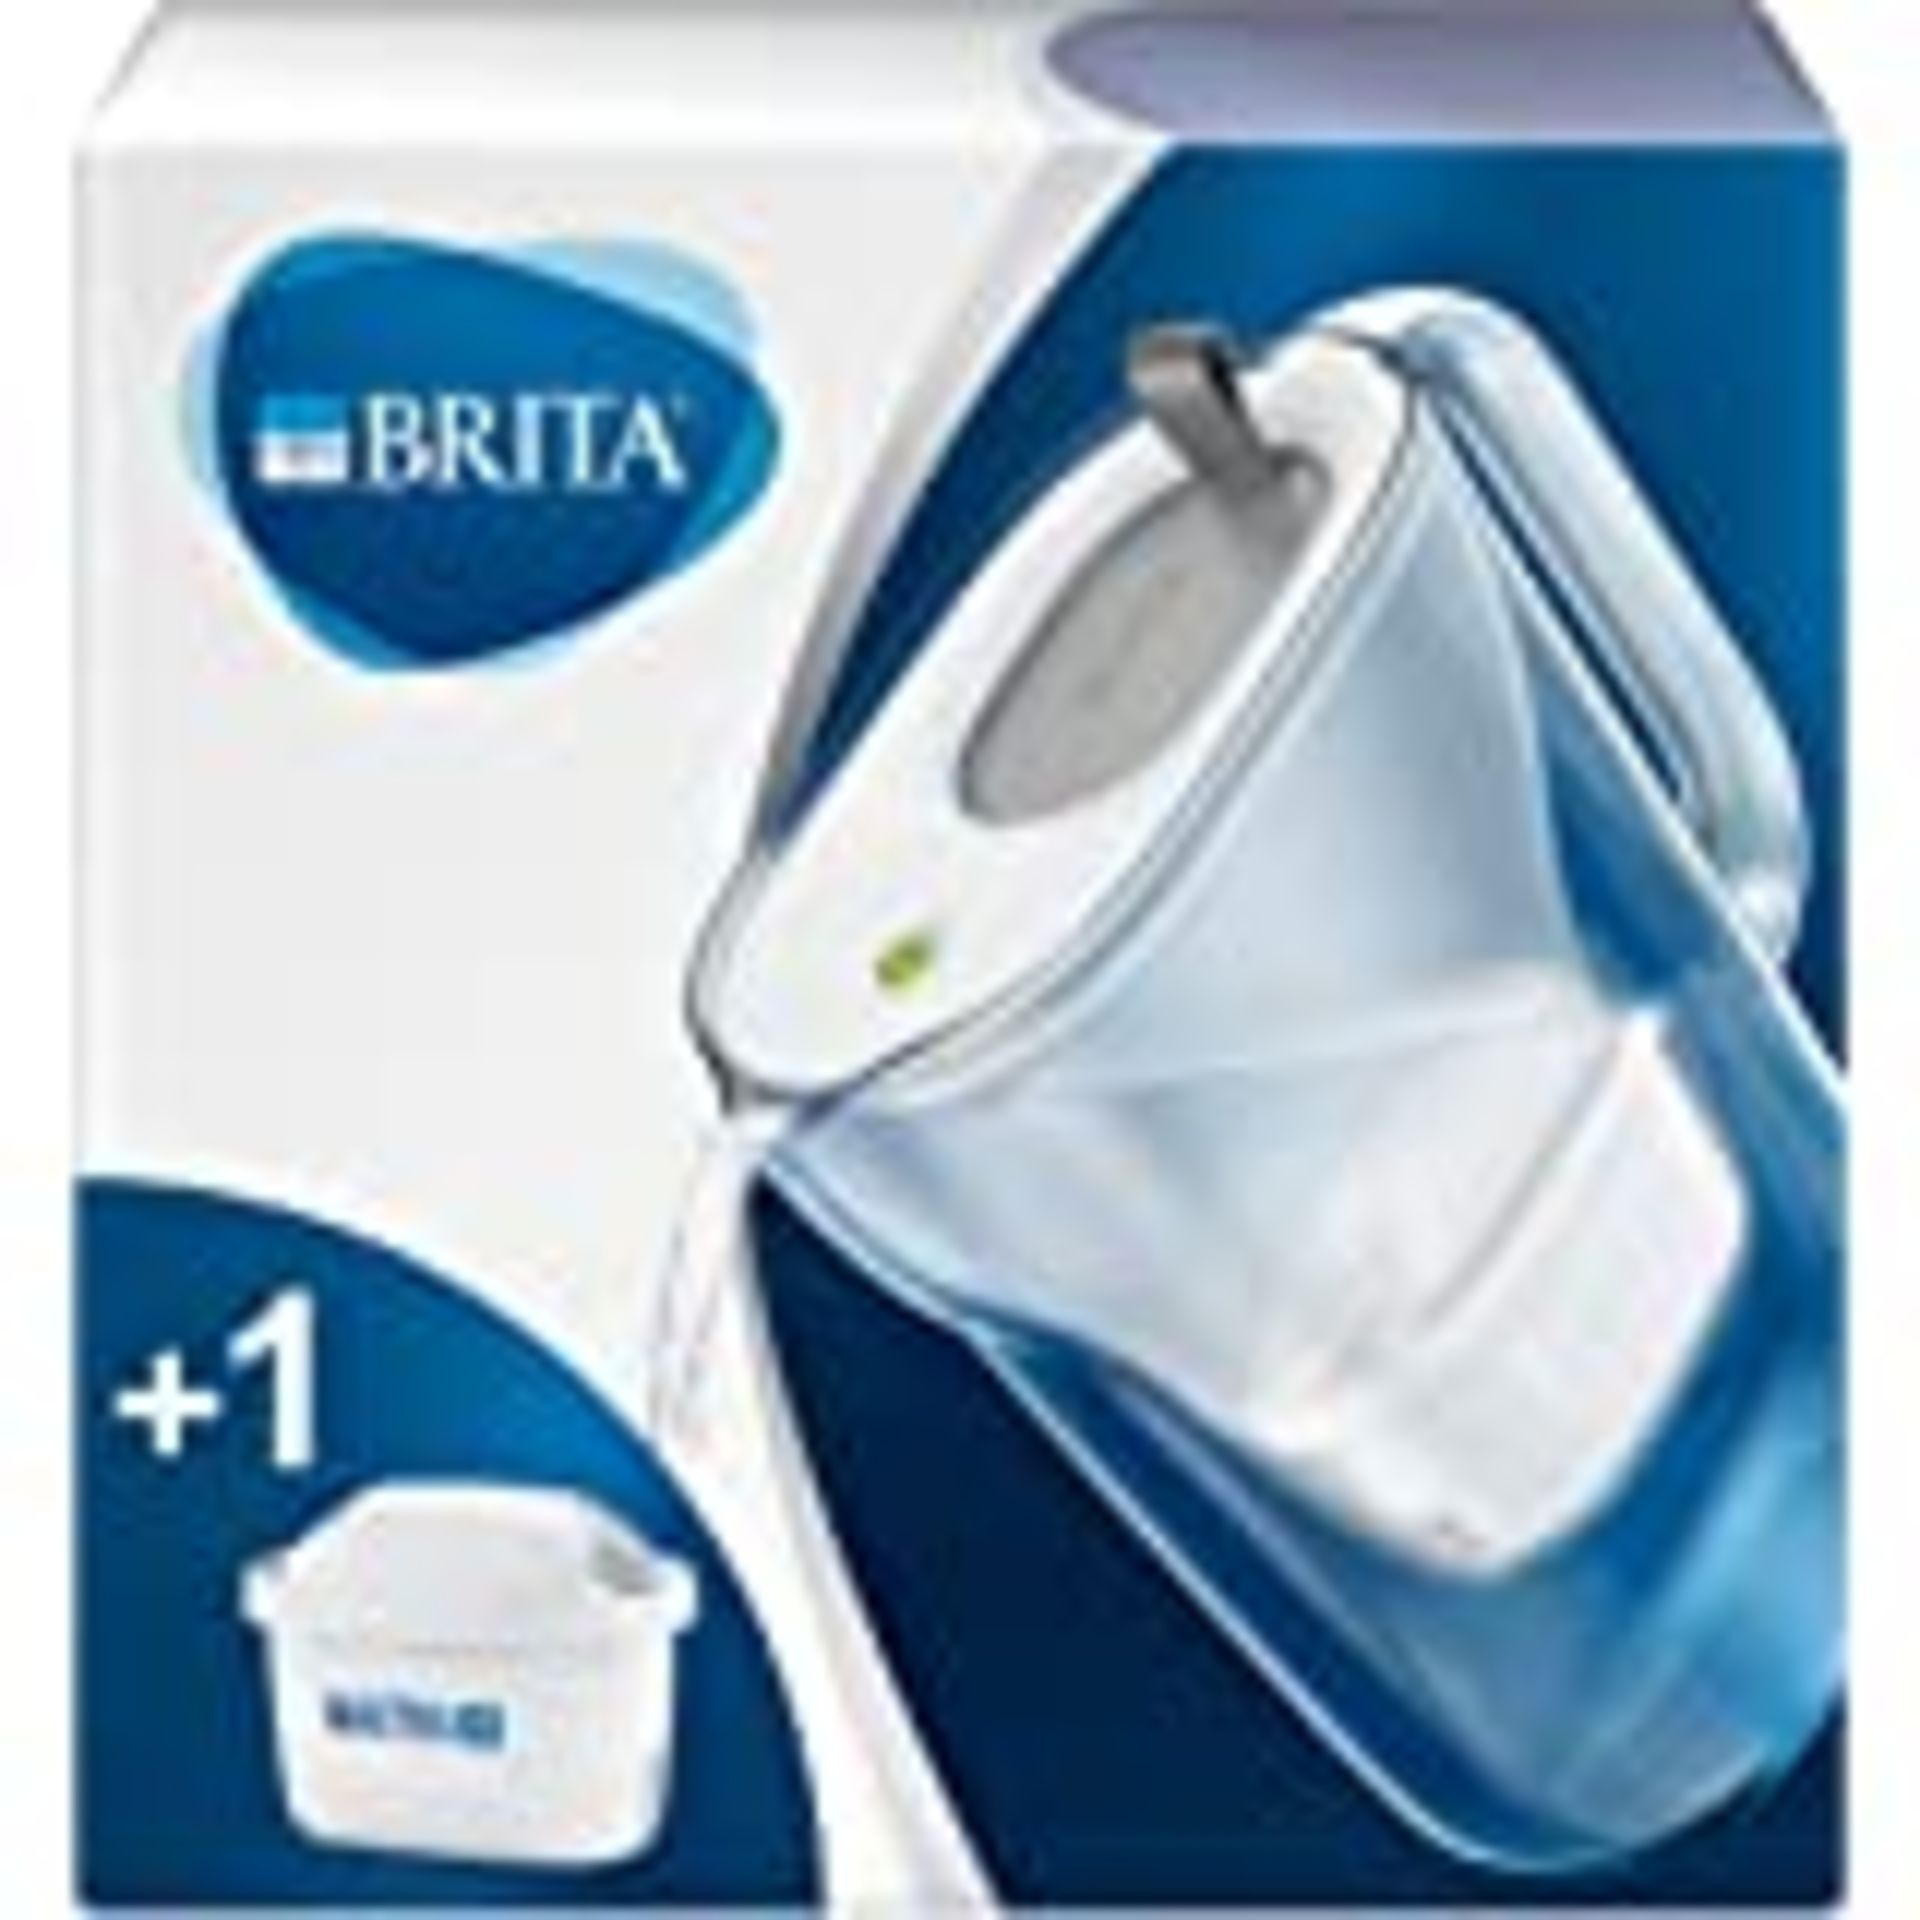 BRITA Marella fridge water filter jug for reduction of chlorine, limescale and impurities, Includes